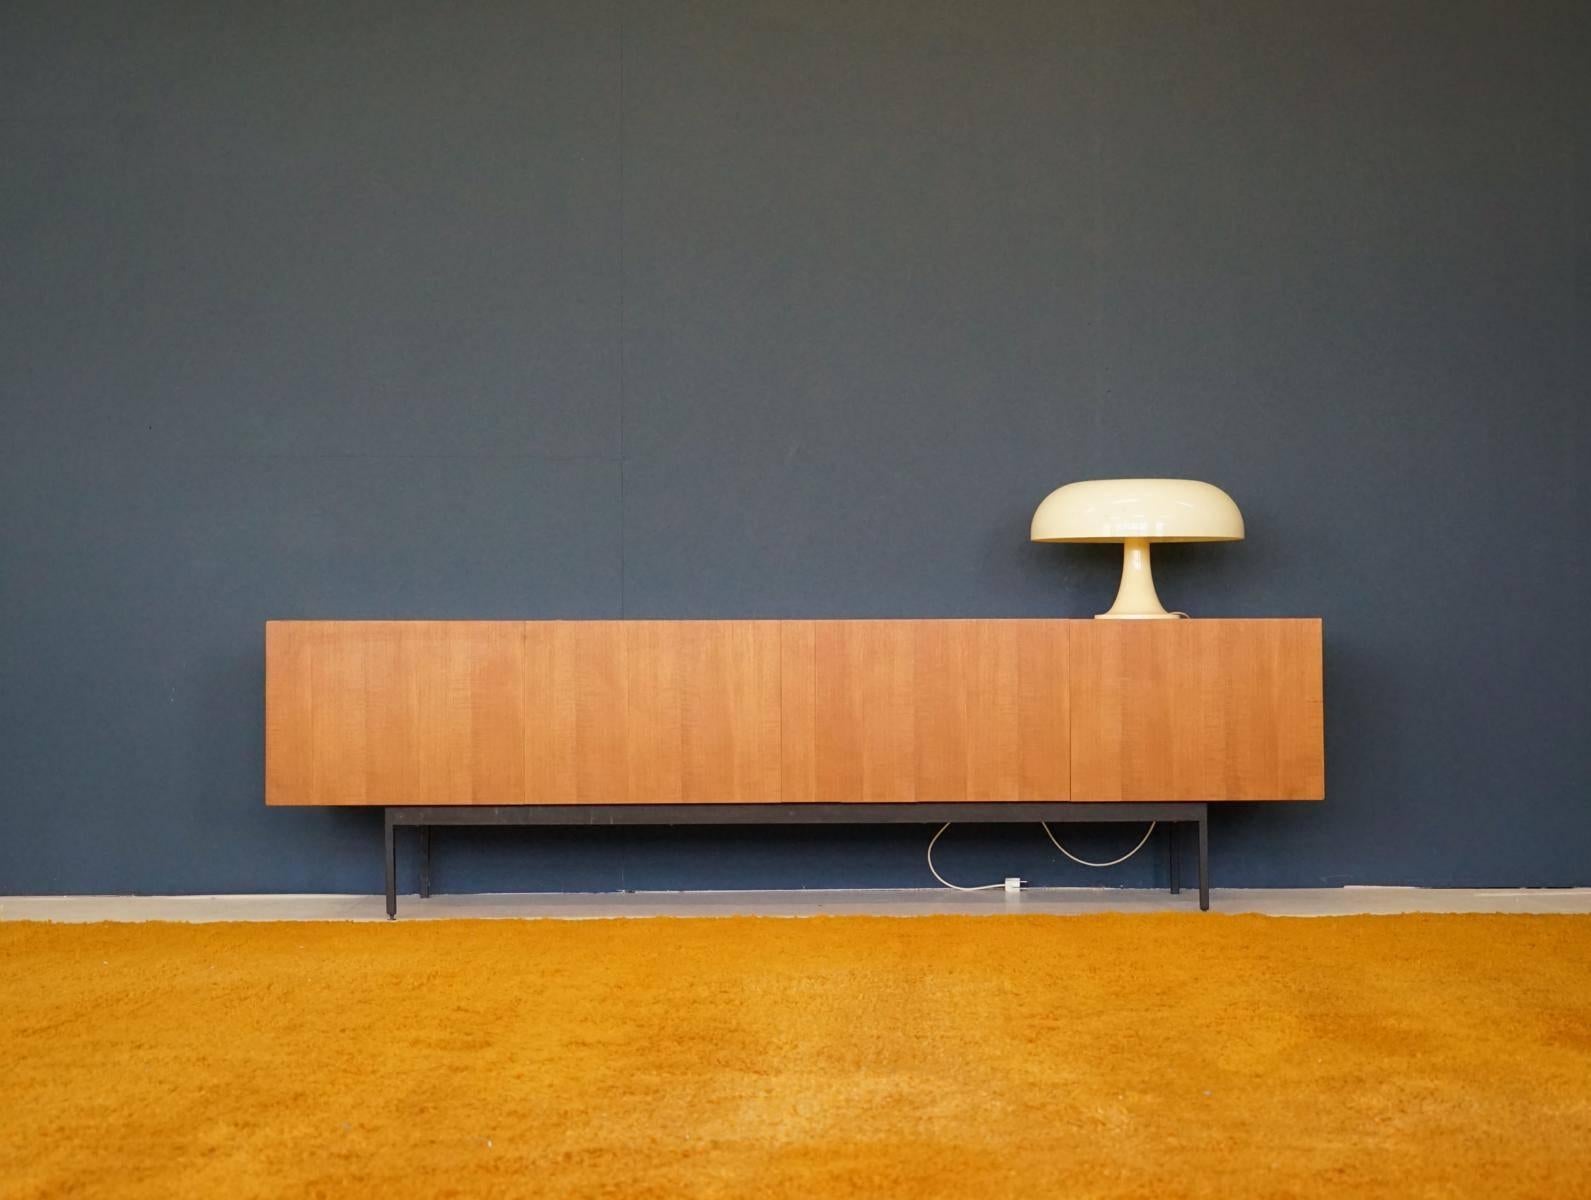 Midcentury B40 sideboard in teak by Dieter Waeckerlin for Behr, 1950s, Germany

The elegant Waeckerlin B40 sideboard is very high quality processed.
The condition of the puristic sideboard is extremely good for the age.

Behr has probably